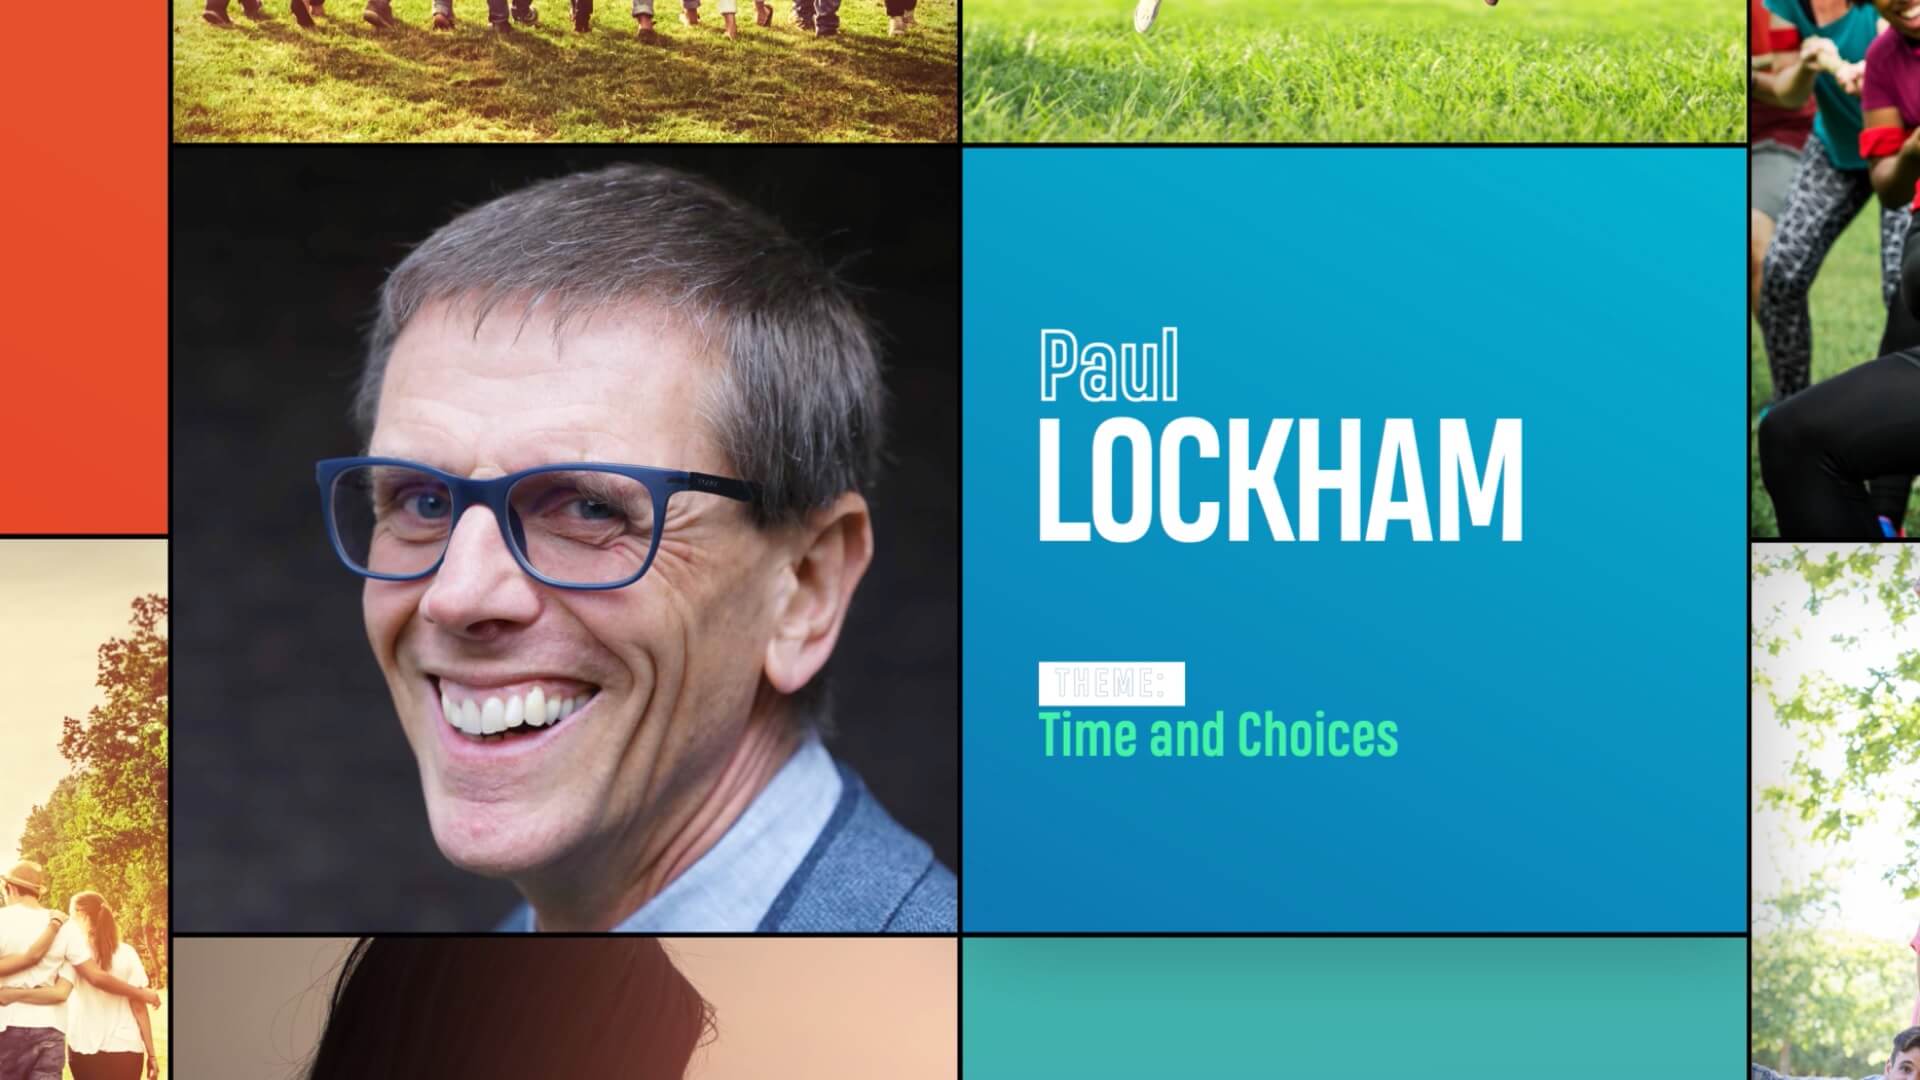 P.Lockham Time and choices